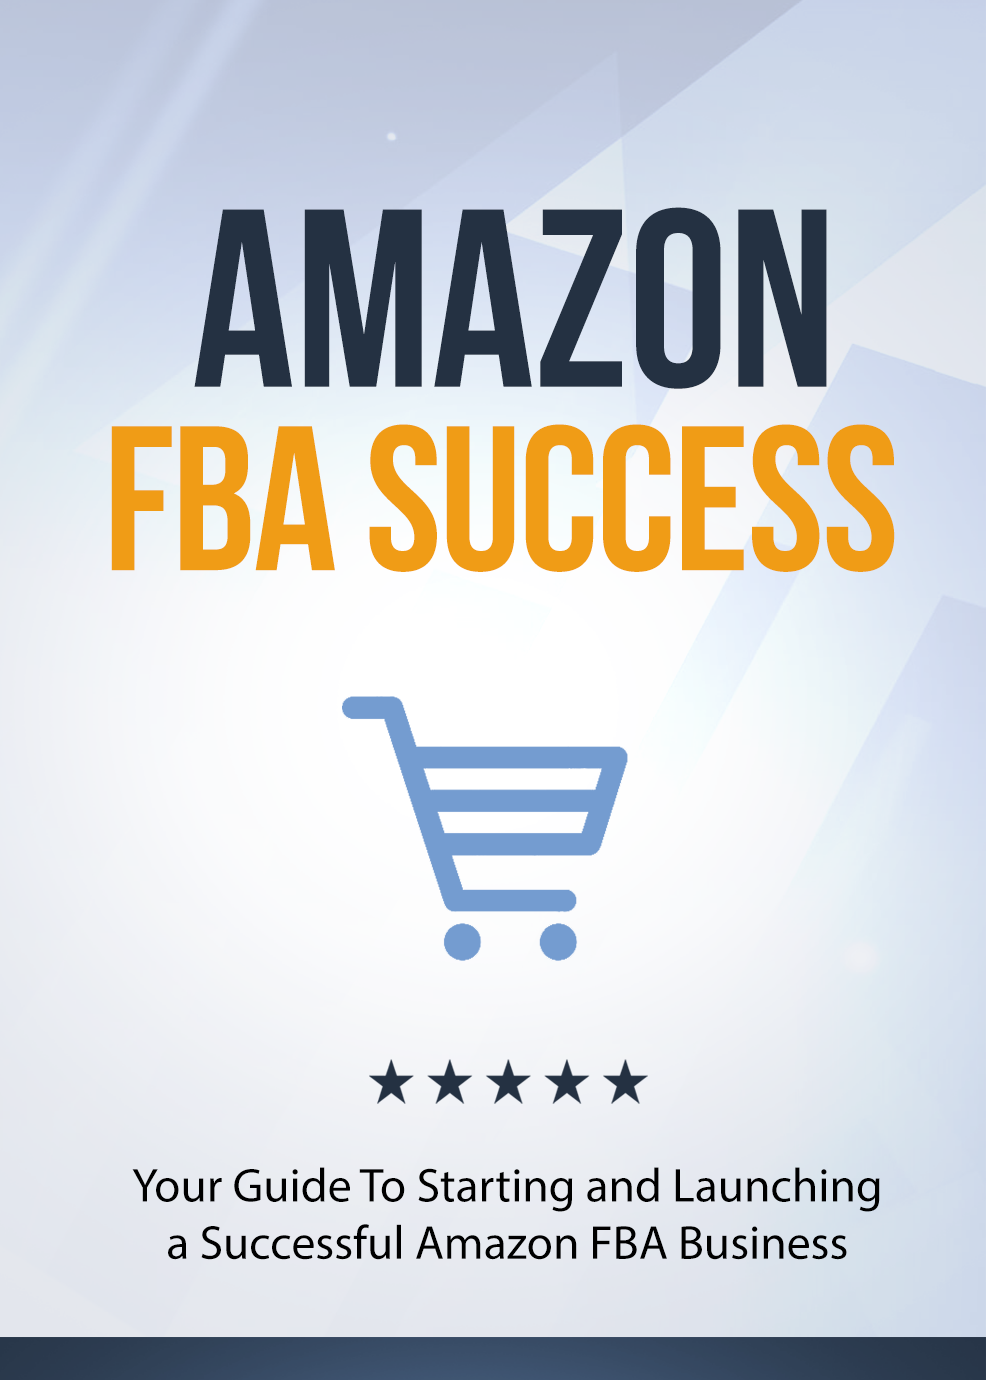 Amazon FBA Success (Your Guide to Starting and Launching a Successful Amazon FBA Business) Ebook's Book Image